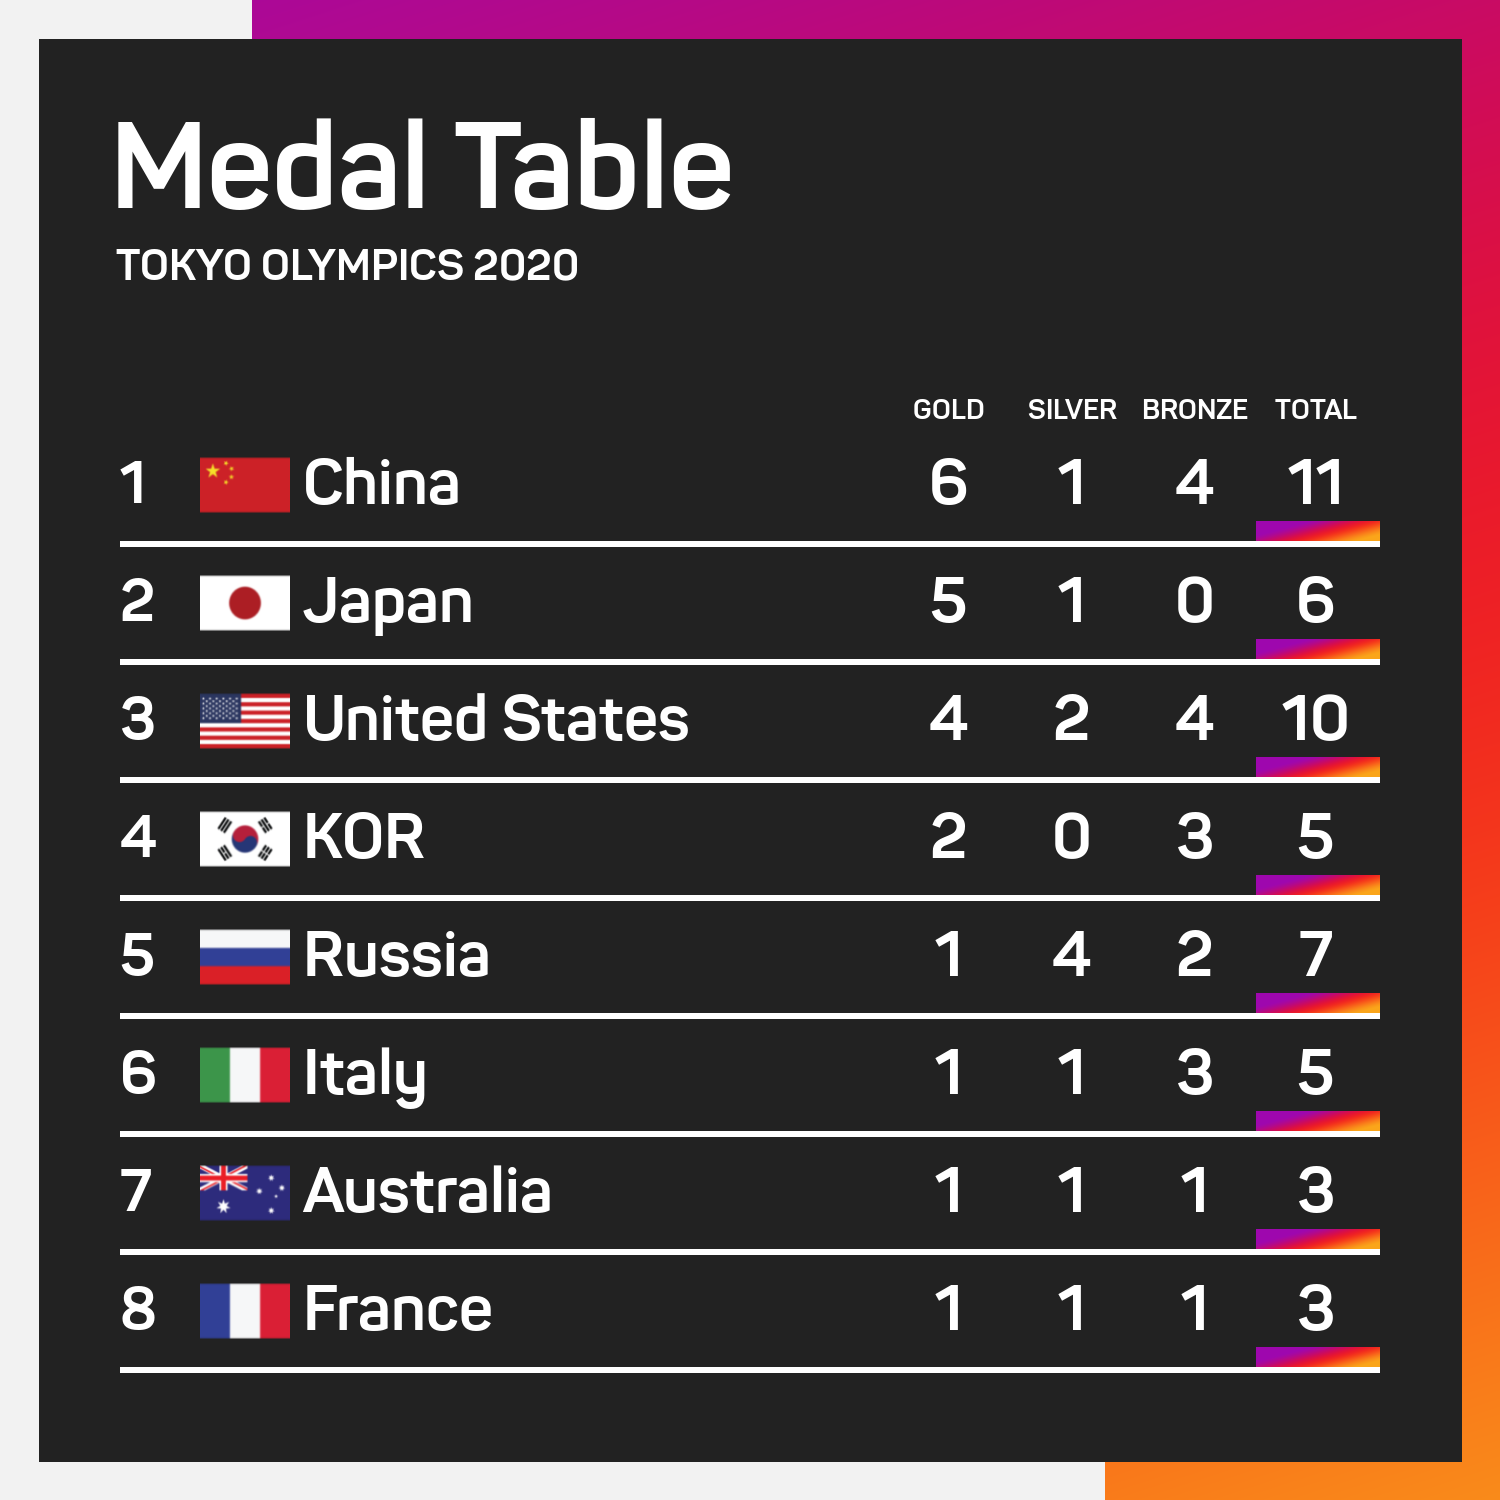 China topped the medals table